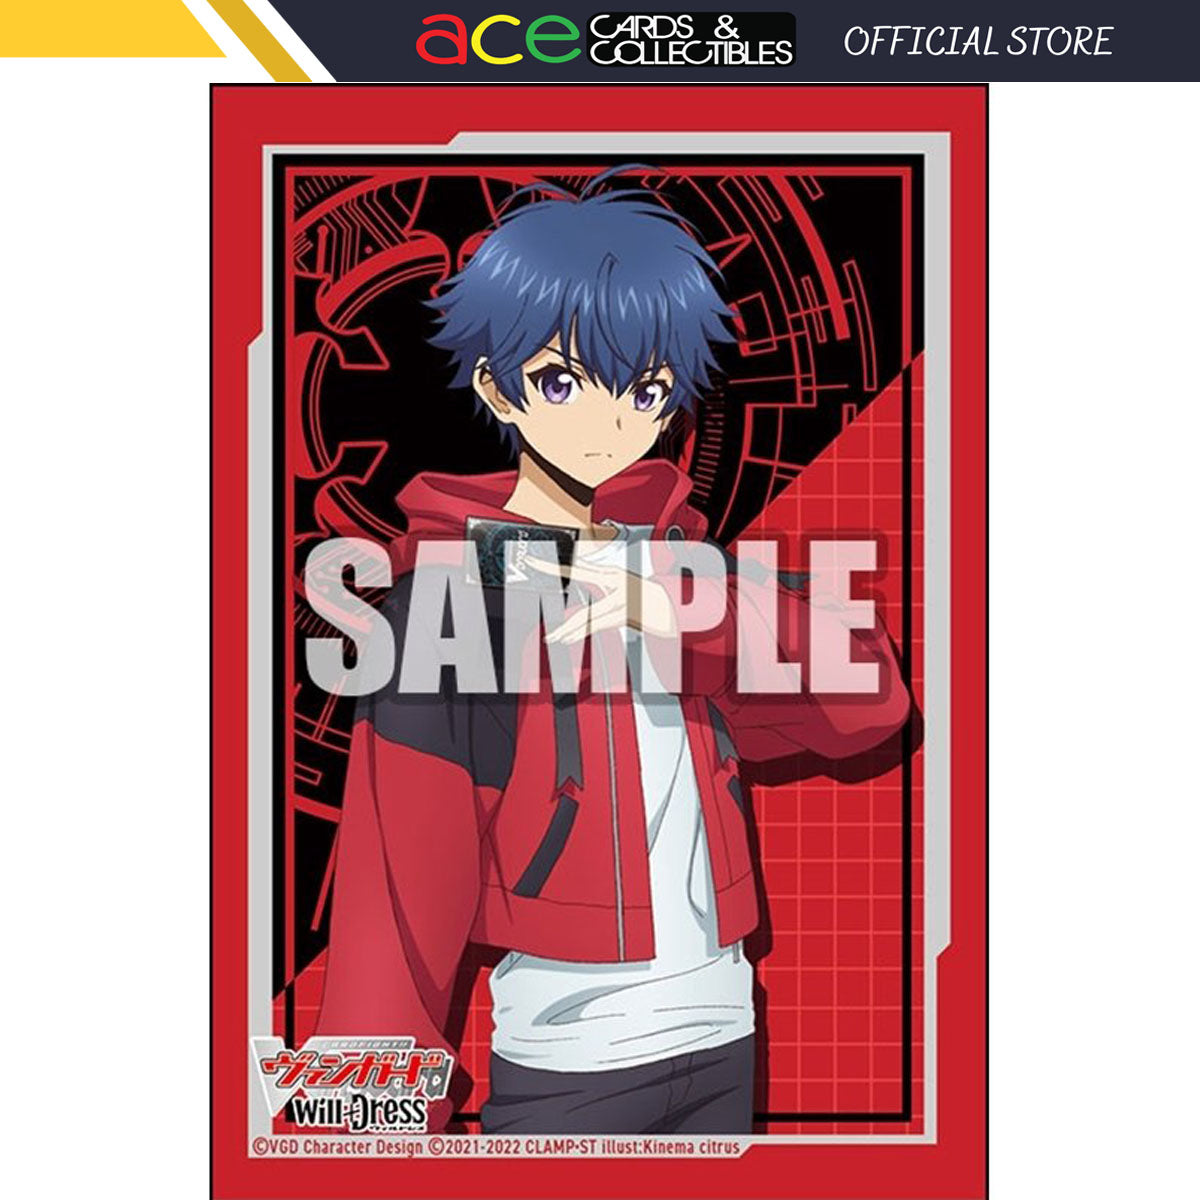 CardFight Vanguard OverDress Sleeve Collection Mini Vol. 596 "Yu-yu Kondo"-Bushiroad-Ace Cards & Collectibles